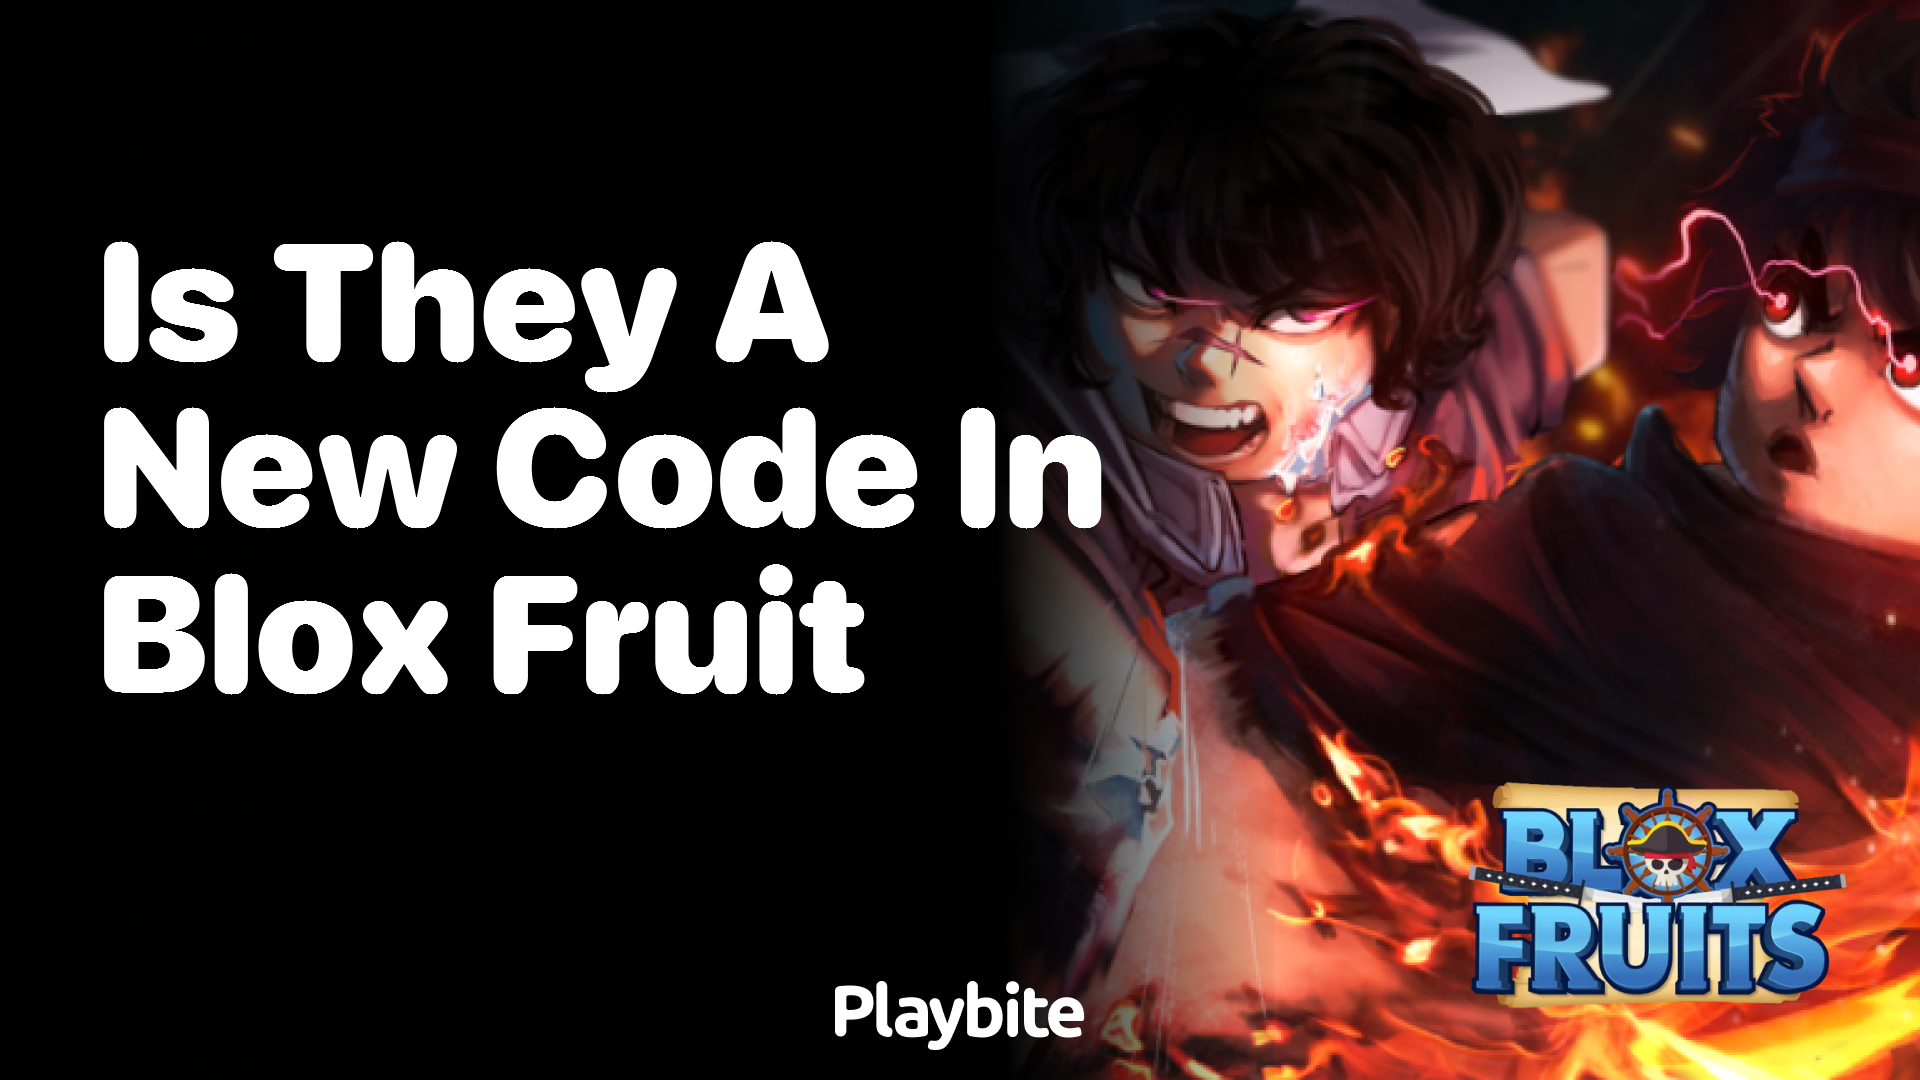 Is There a New Code in Blox Fruit?